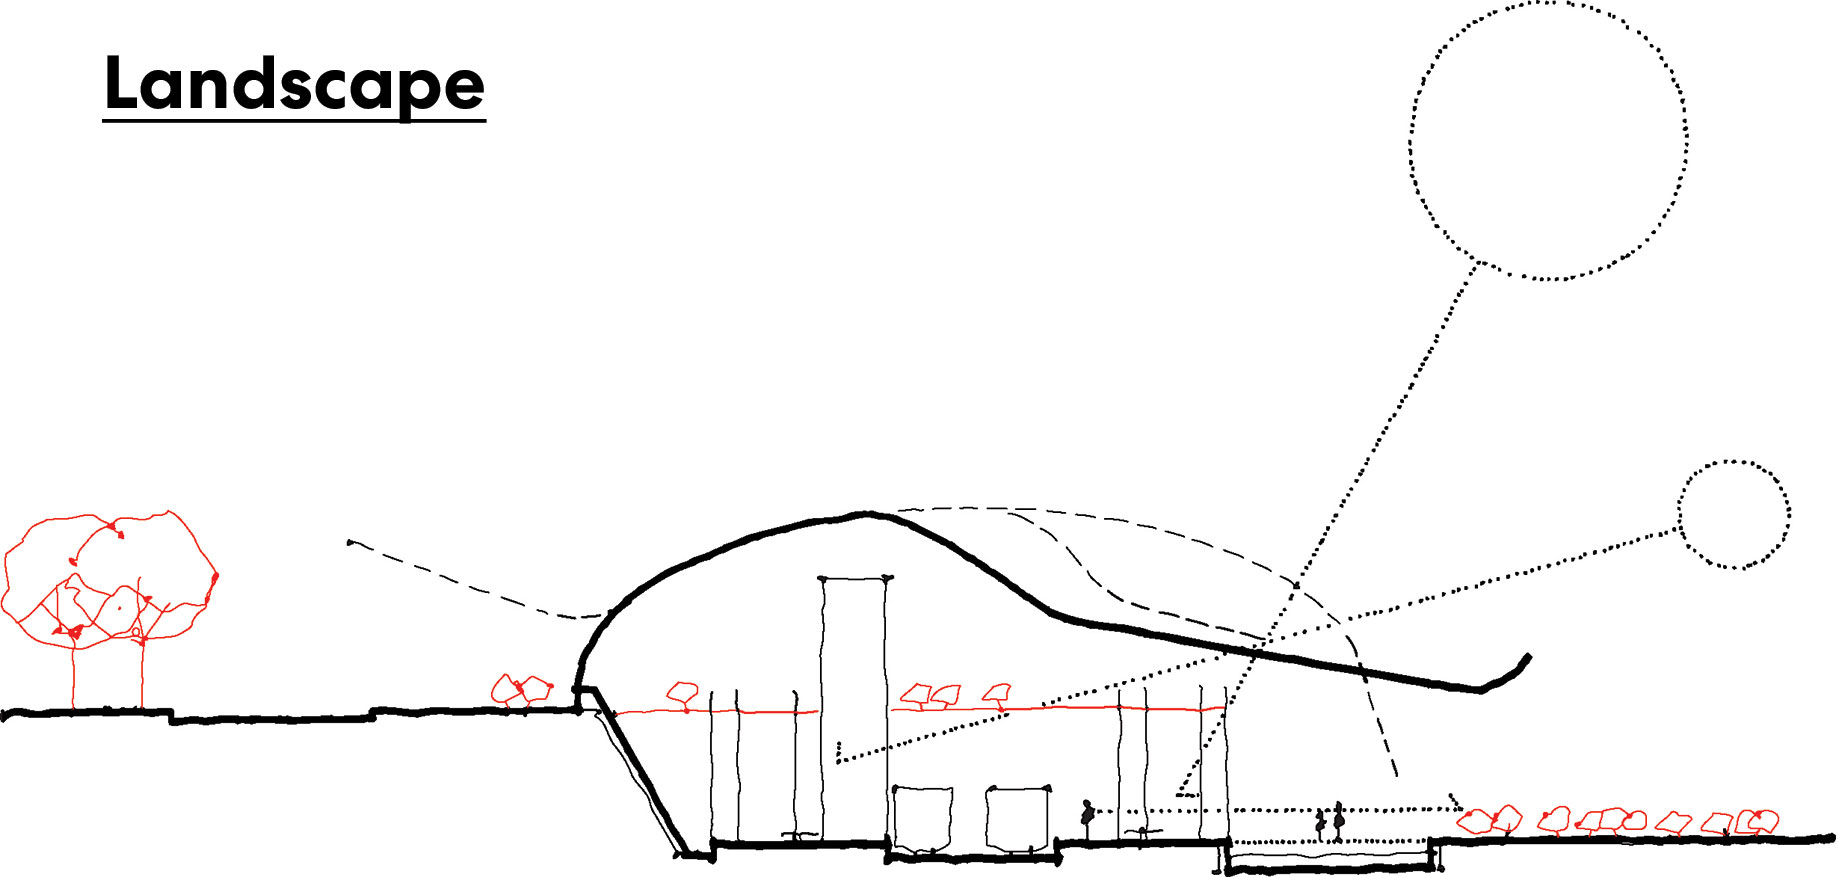 Sketch showing principal architectural elements of stations.